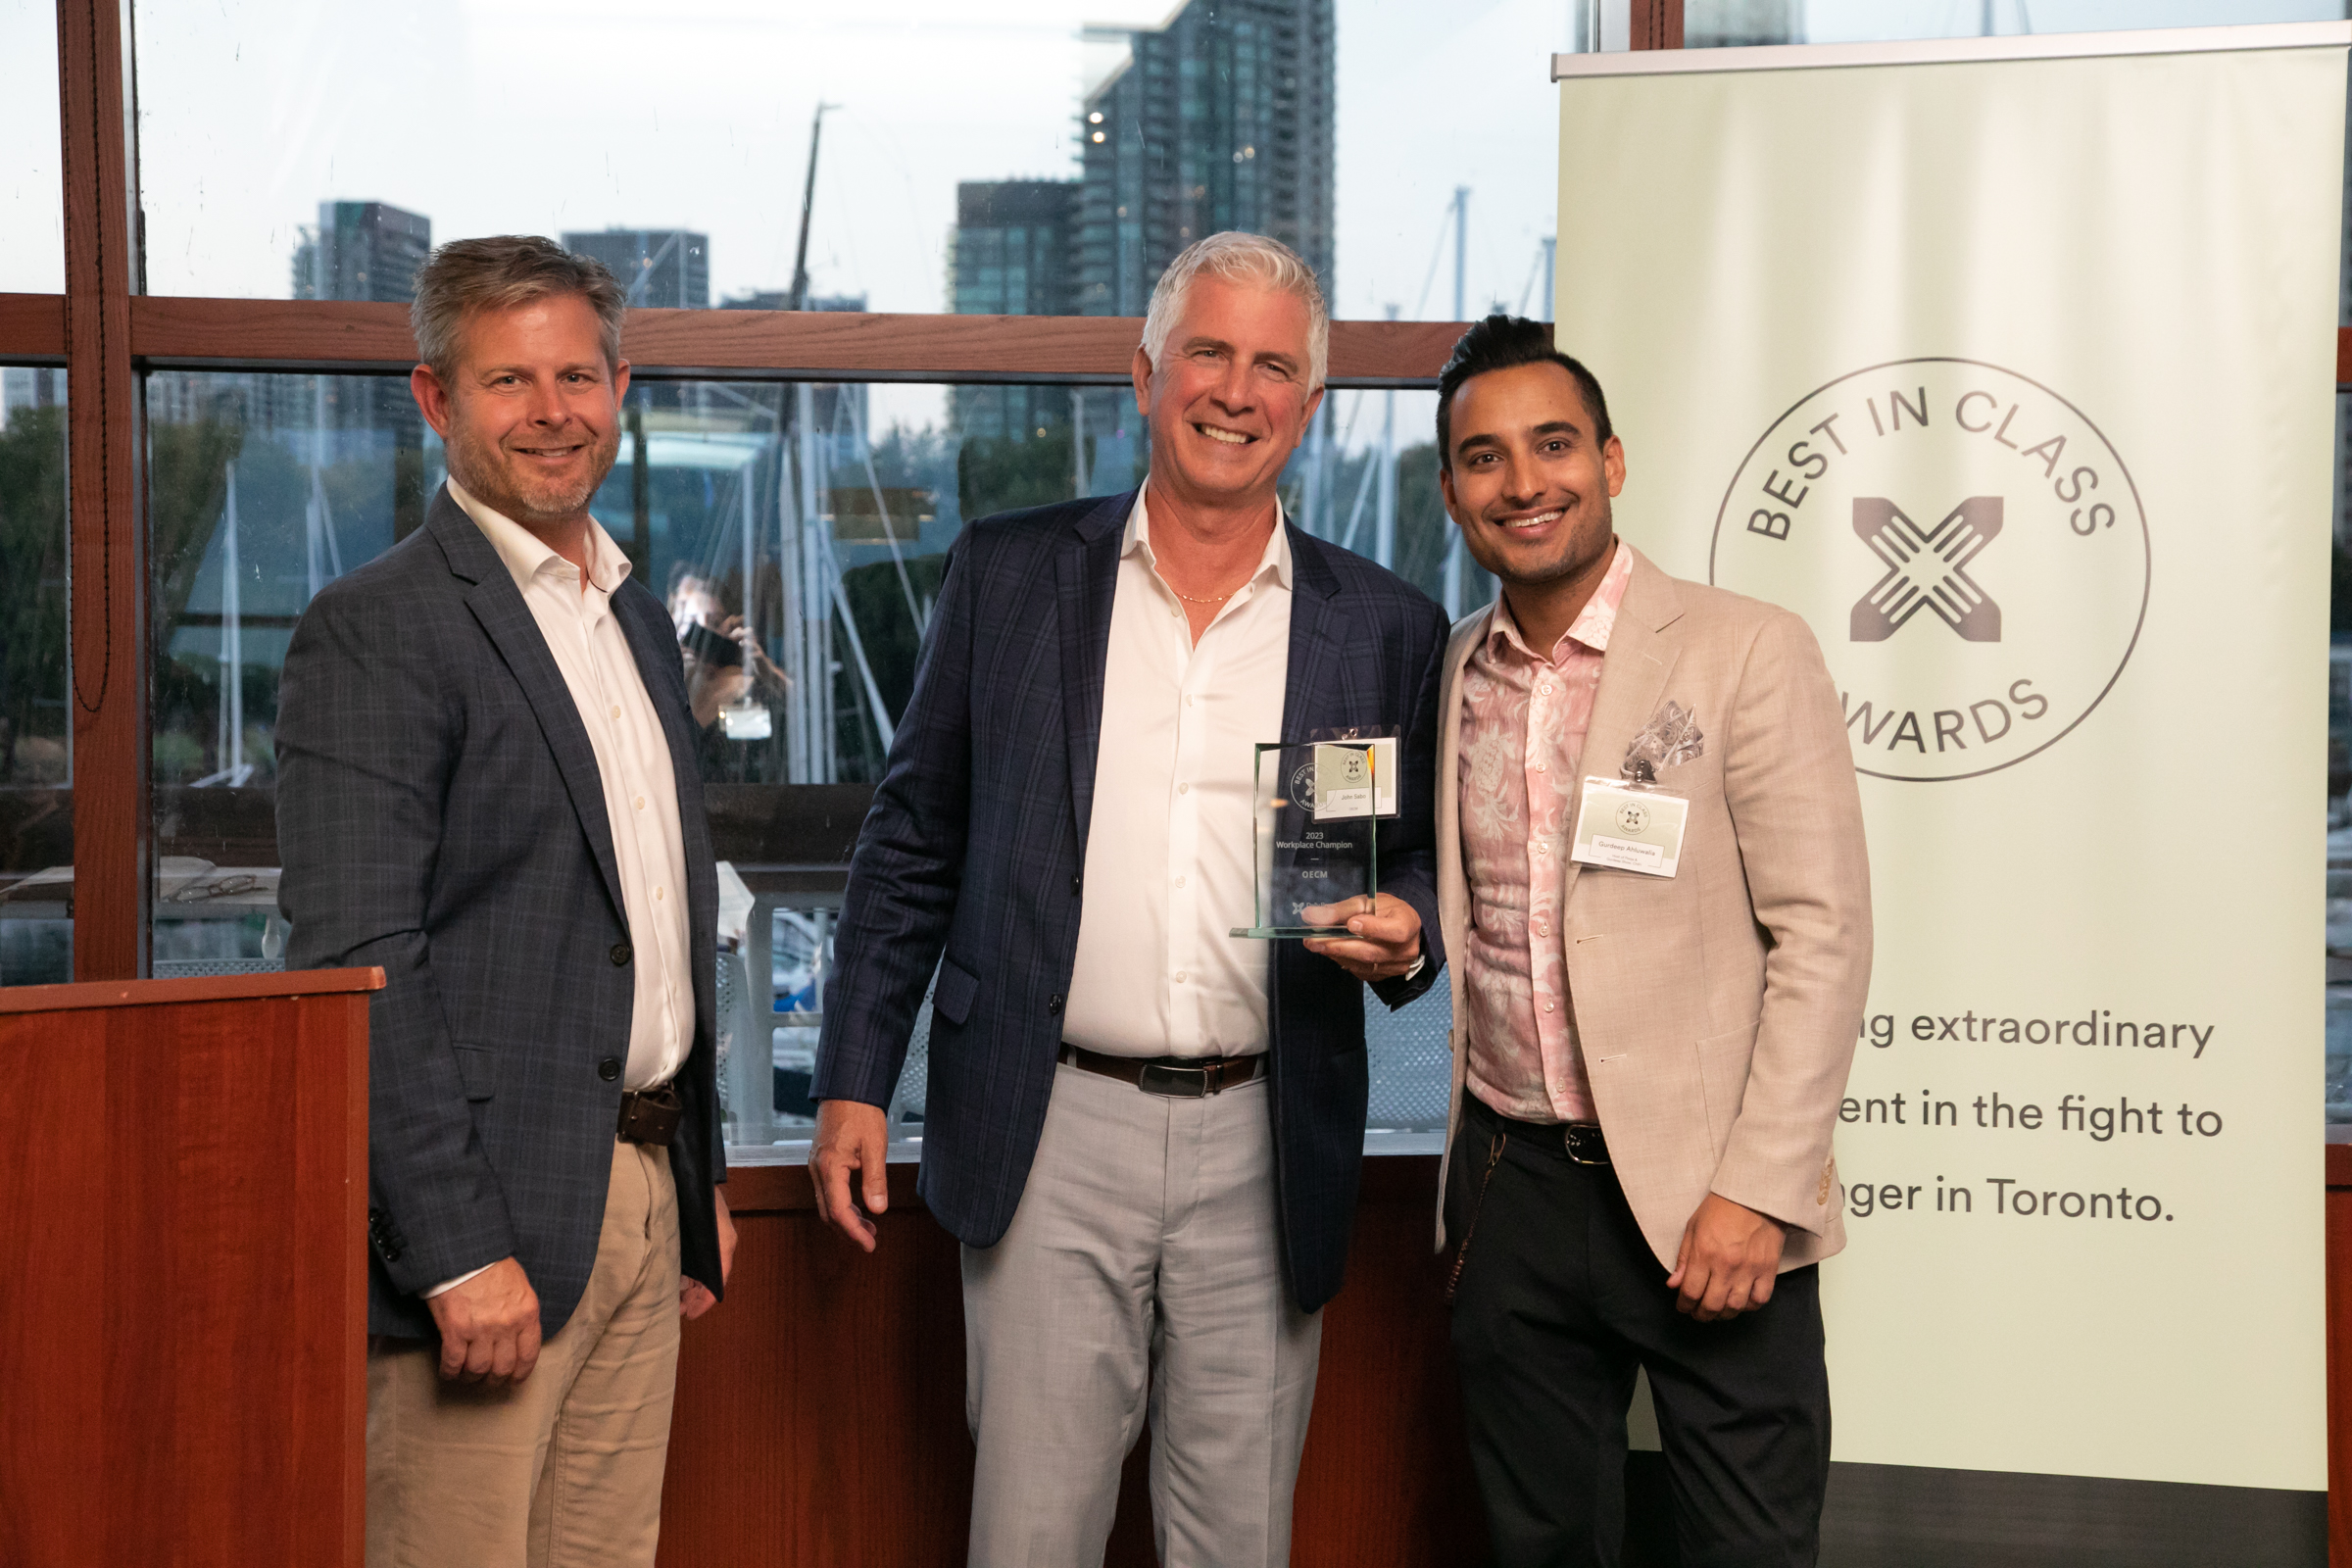 From left: Neil Hetherington, CEO of Daily Bread Food Bank, John Sabo, President and CEO of OECM, and event emcee and radio personality, Gurdeep Ahluwalia at Daily Bread's Best in Class Awards ceremony.